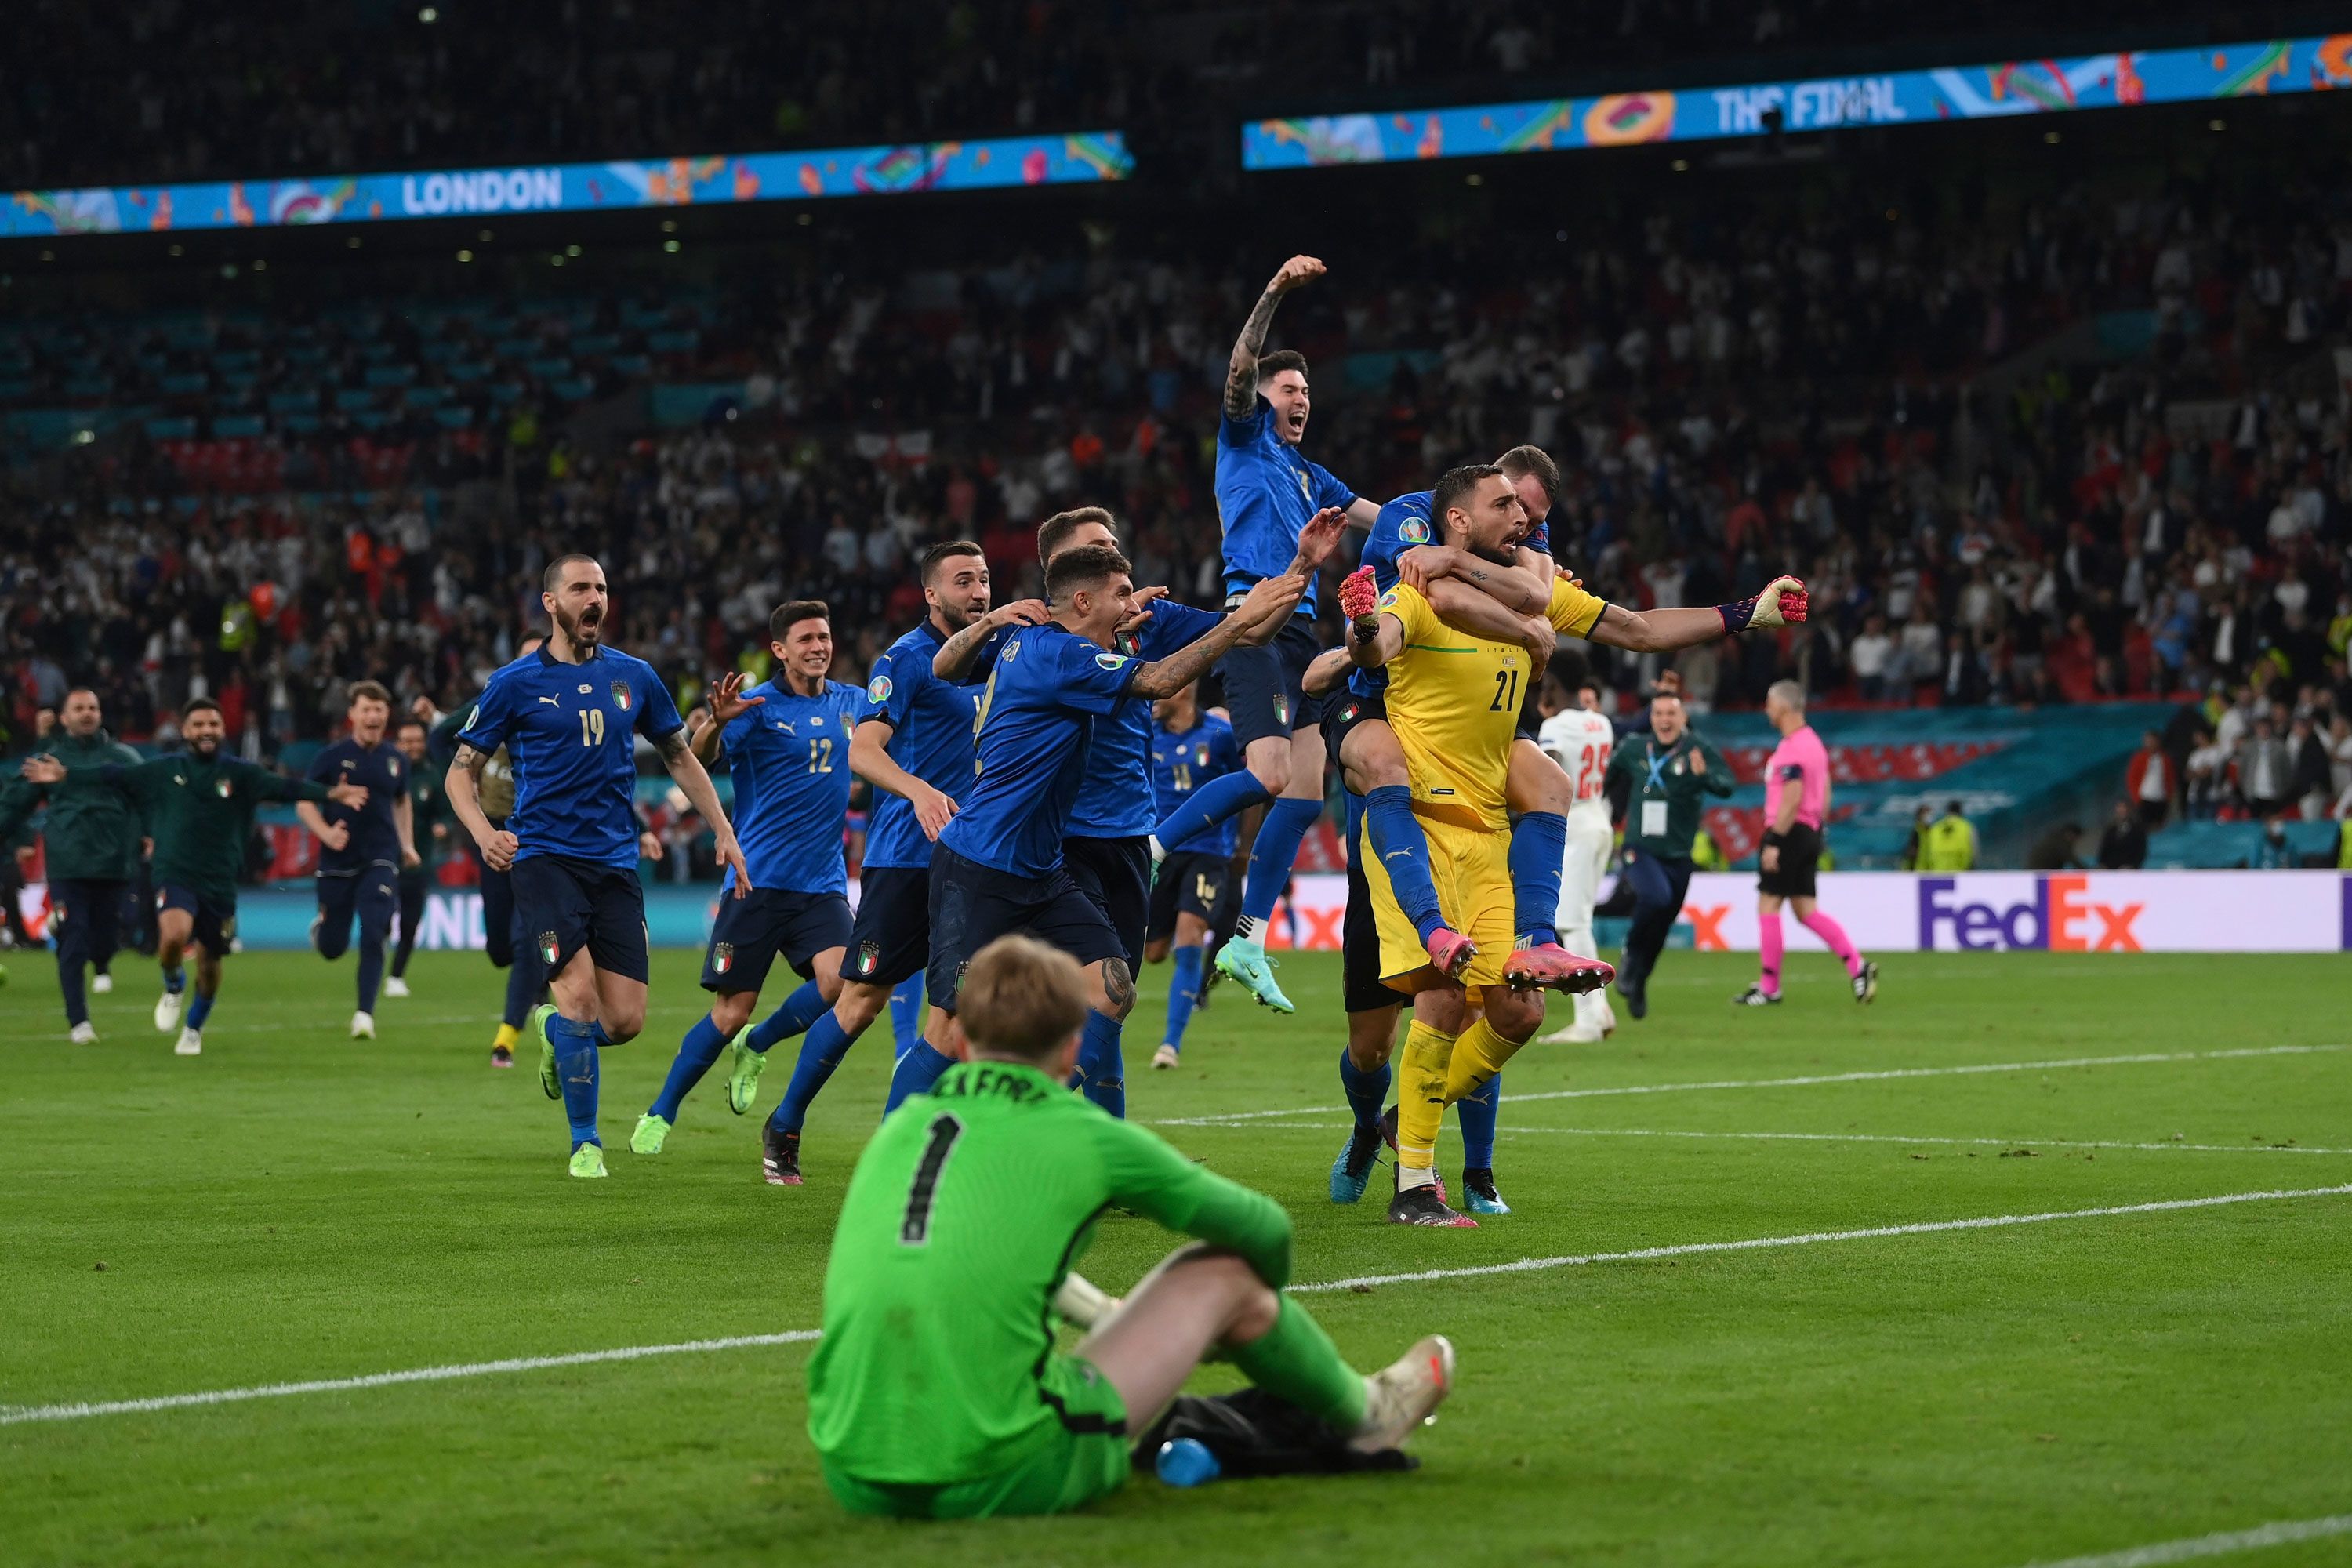 UEFA European Championship: How Italy made it to the final of Euro